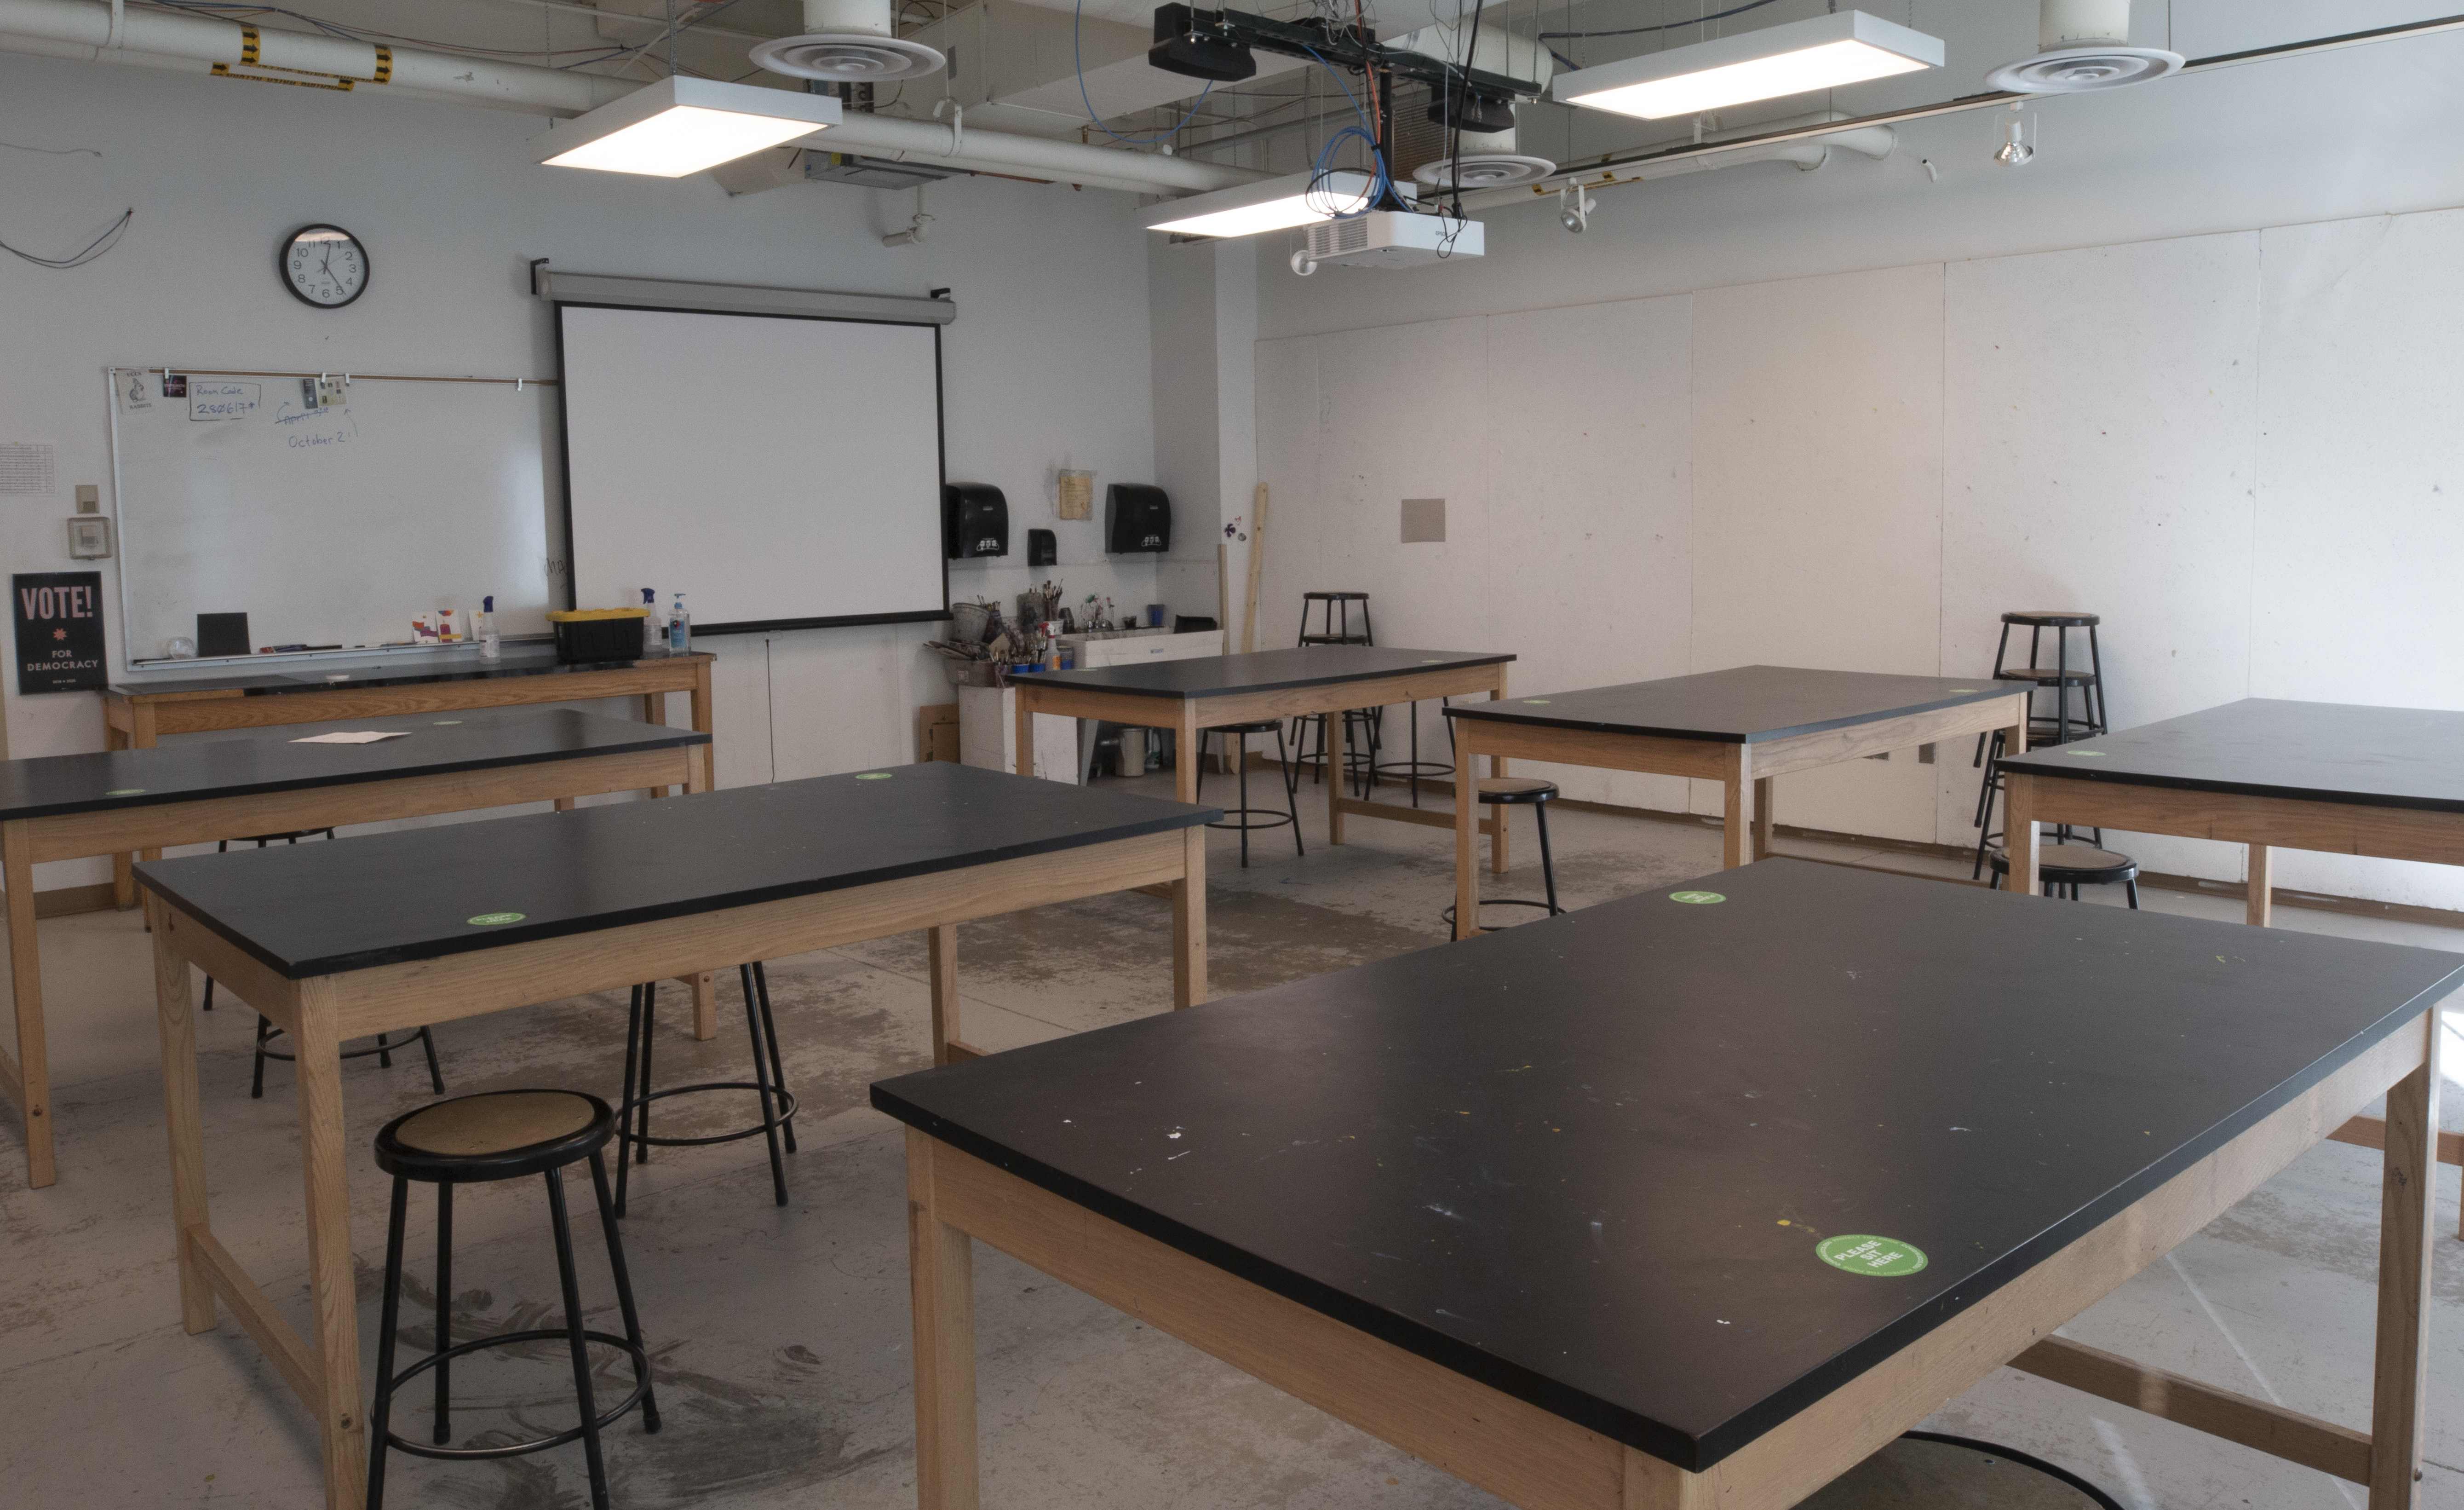 Classroom with projector, screen, and flat desks for drawing